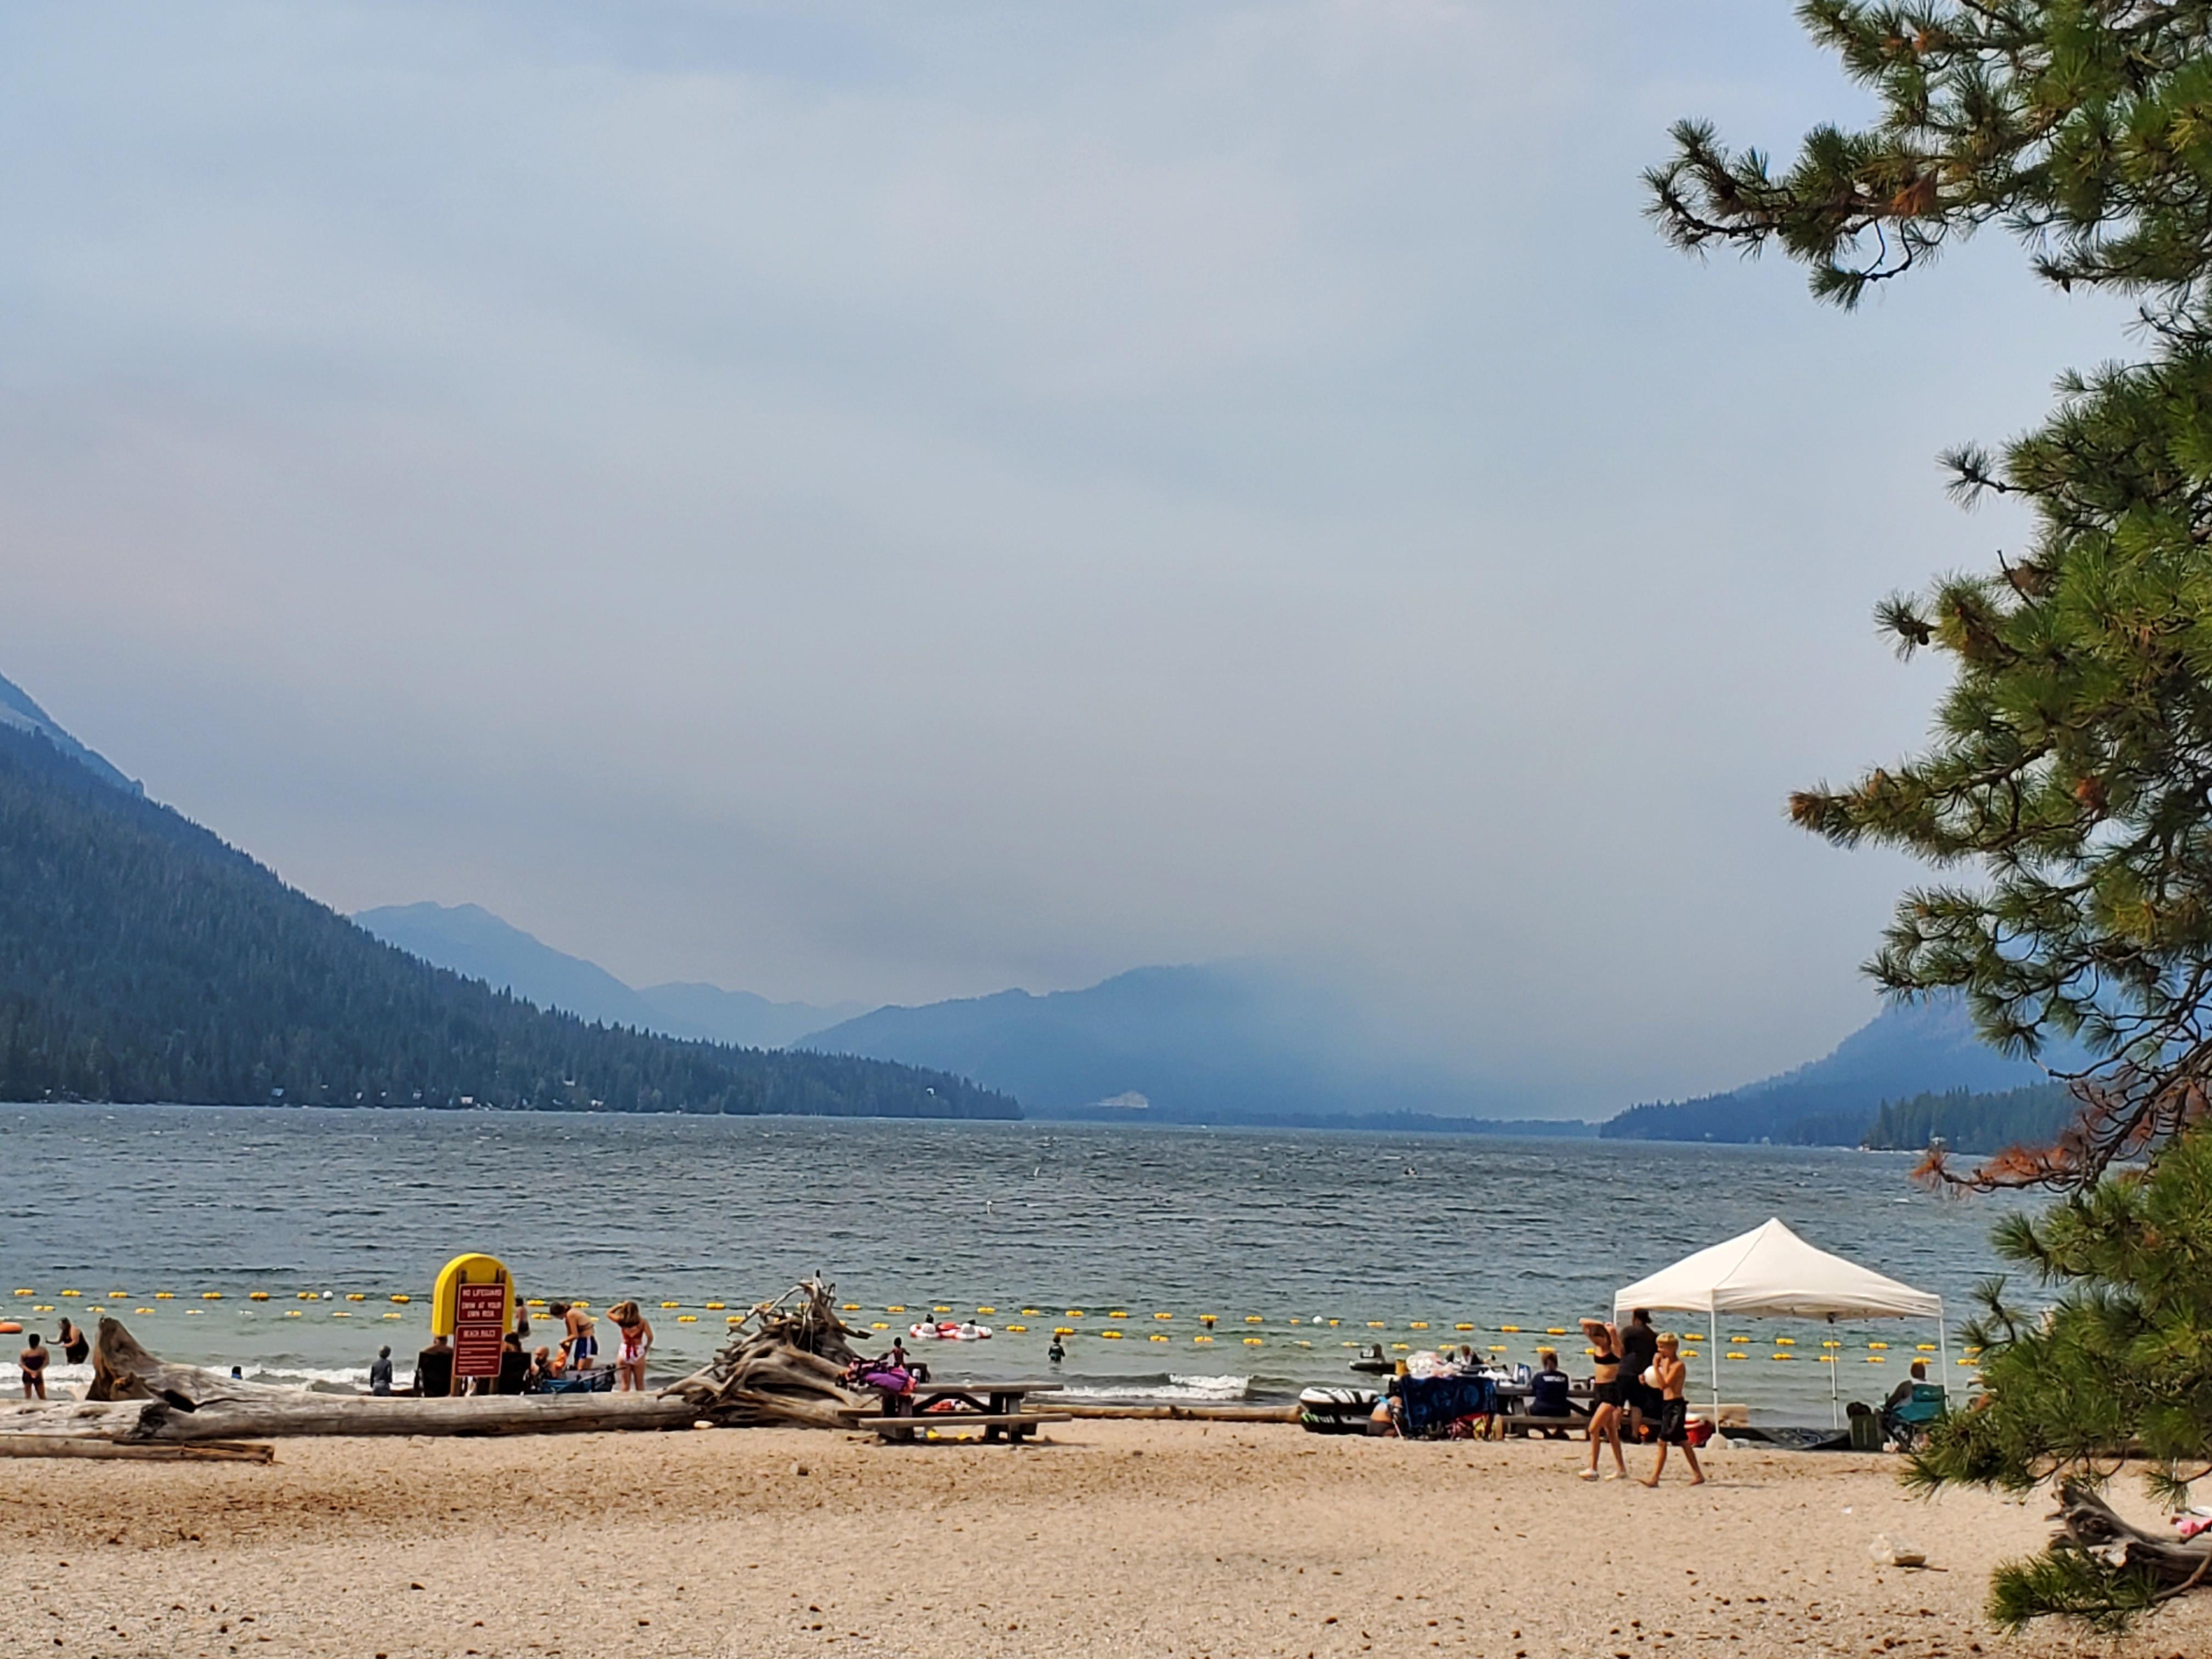 Lake Wenatchee State Park beach looking towards White River Fire